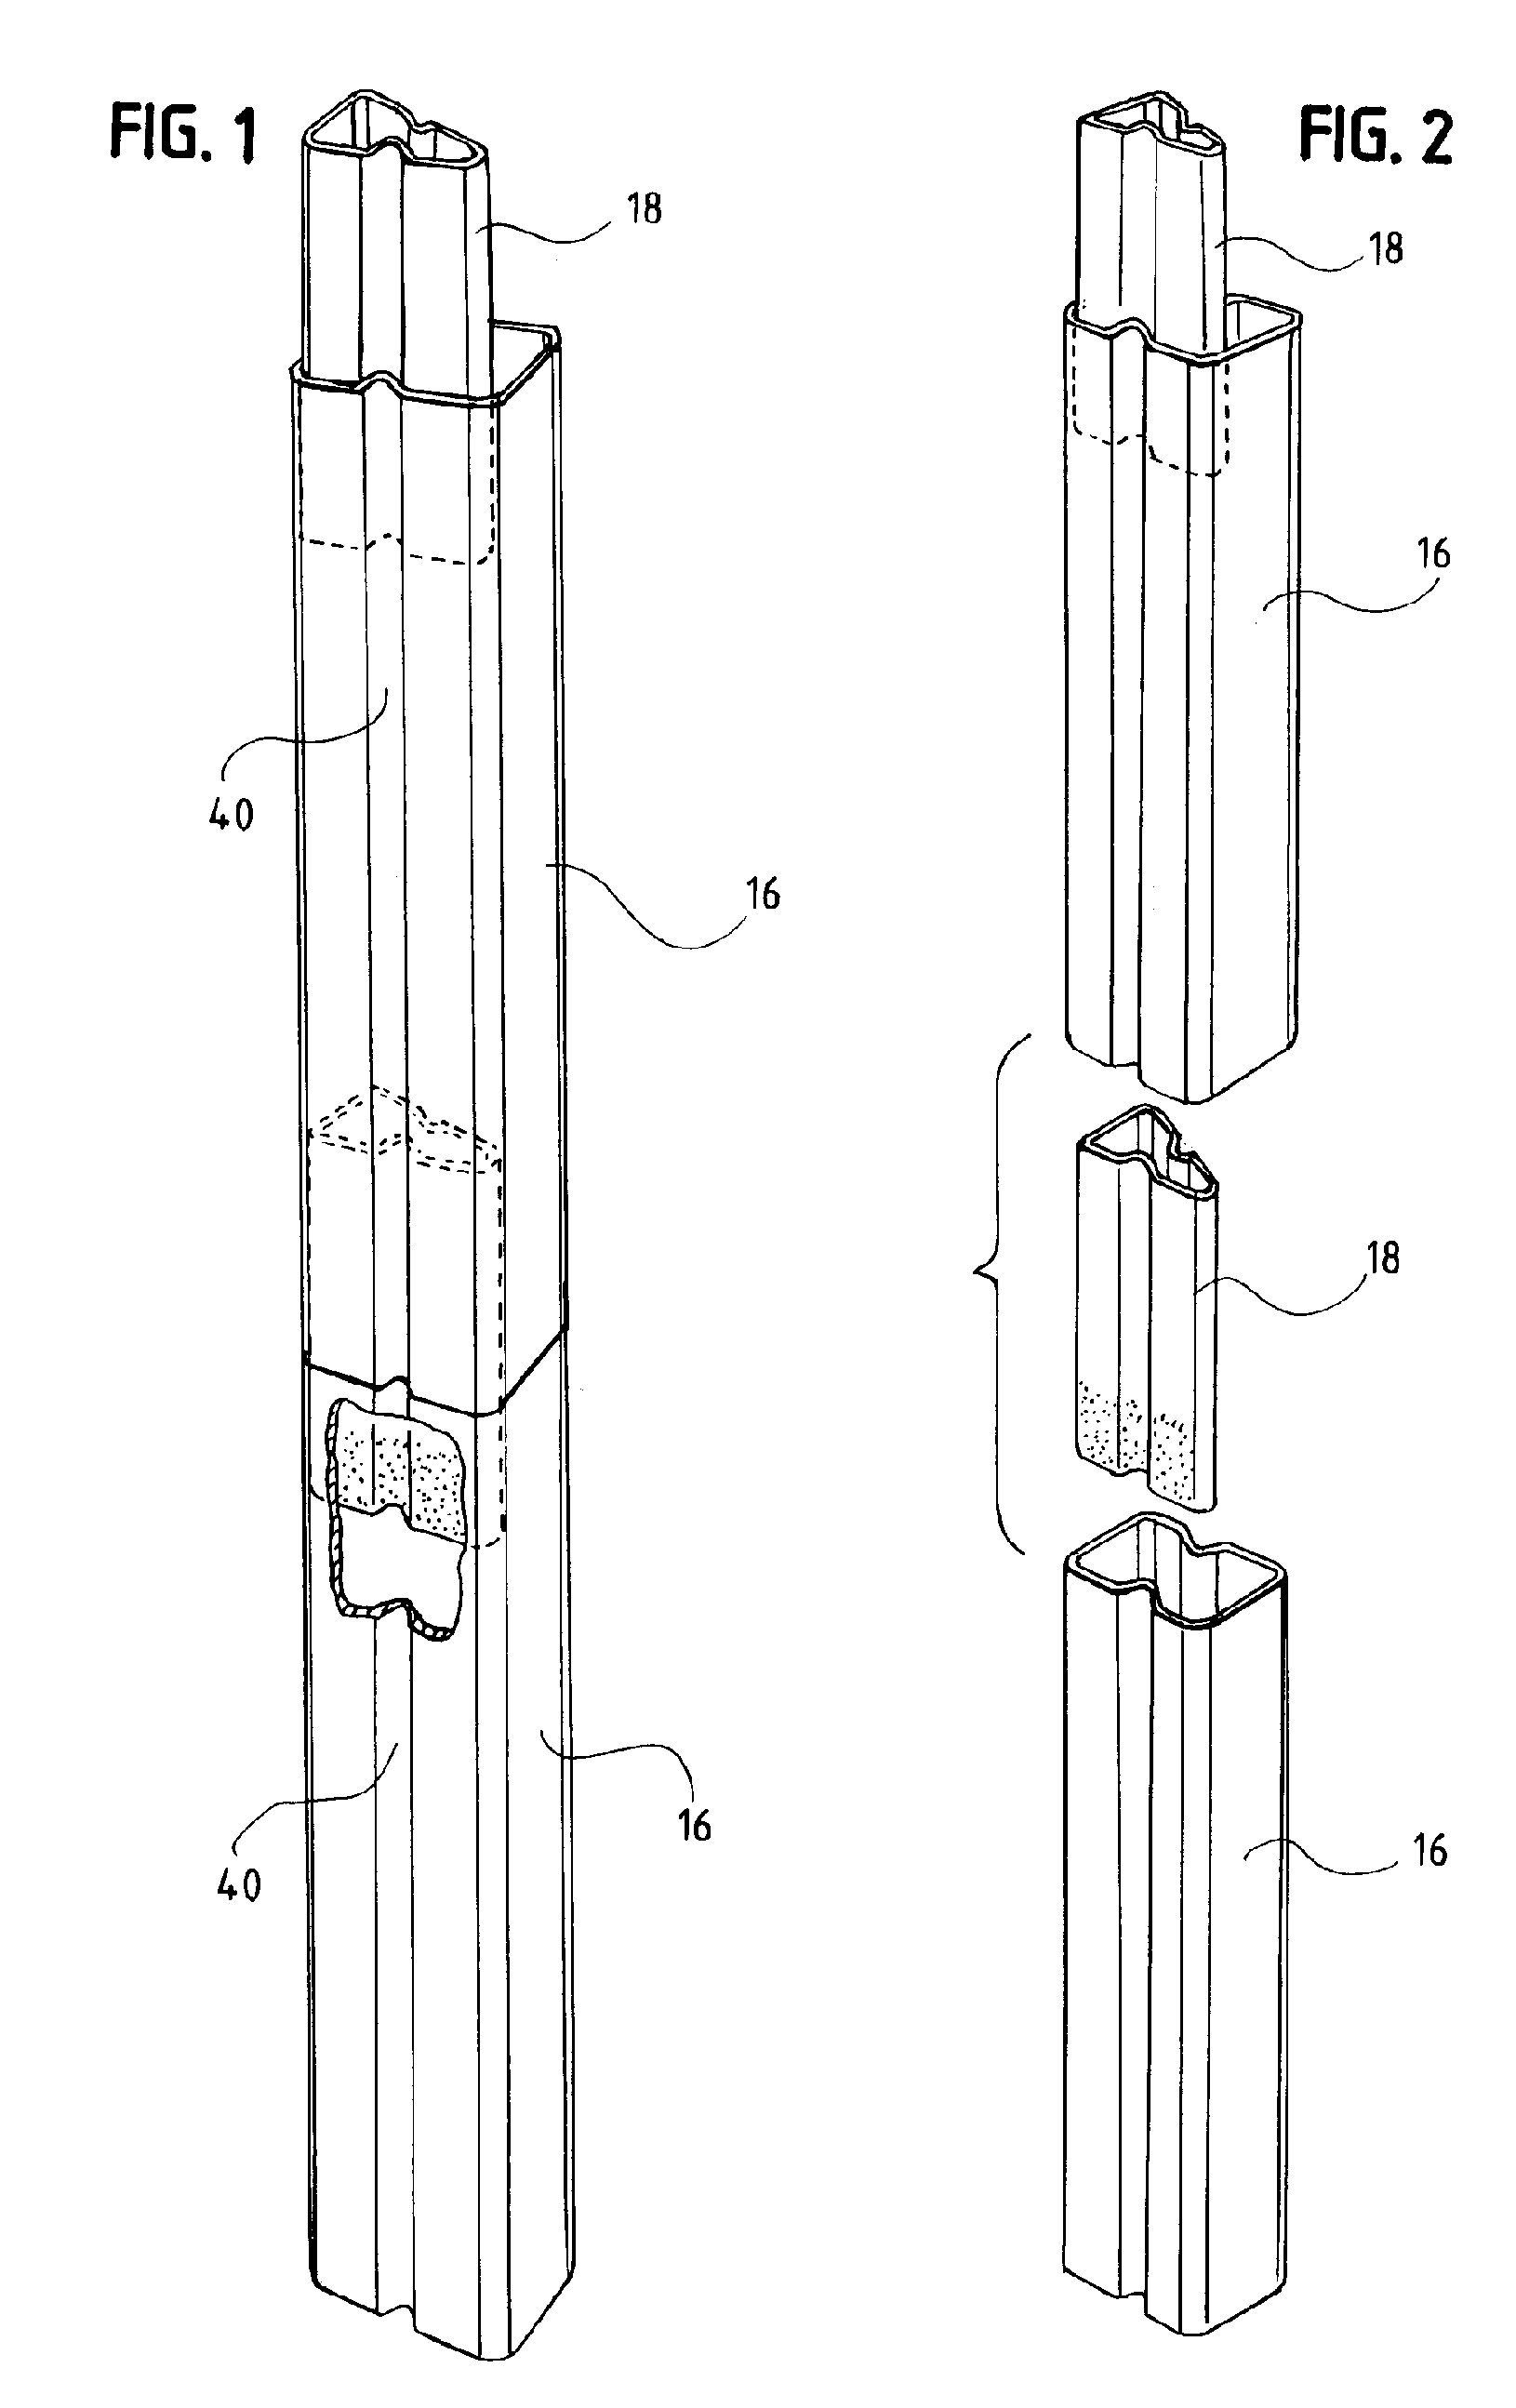 Post in post product packaging and display structure tray system